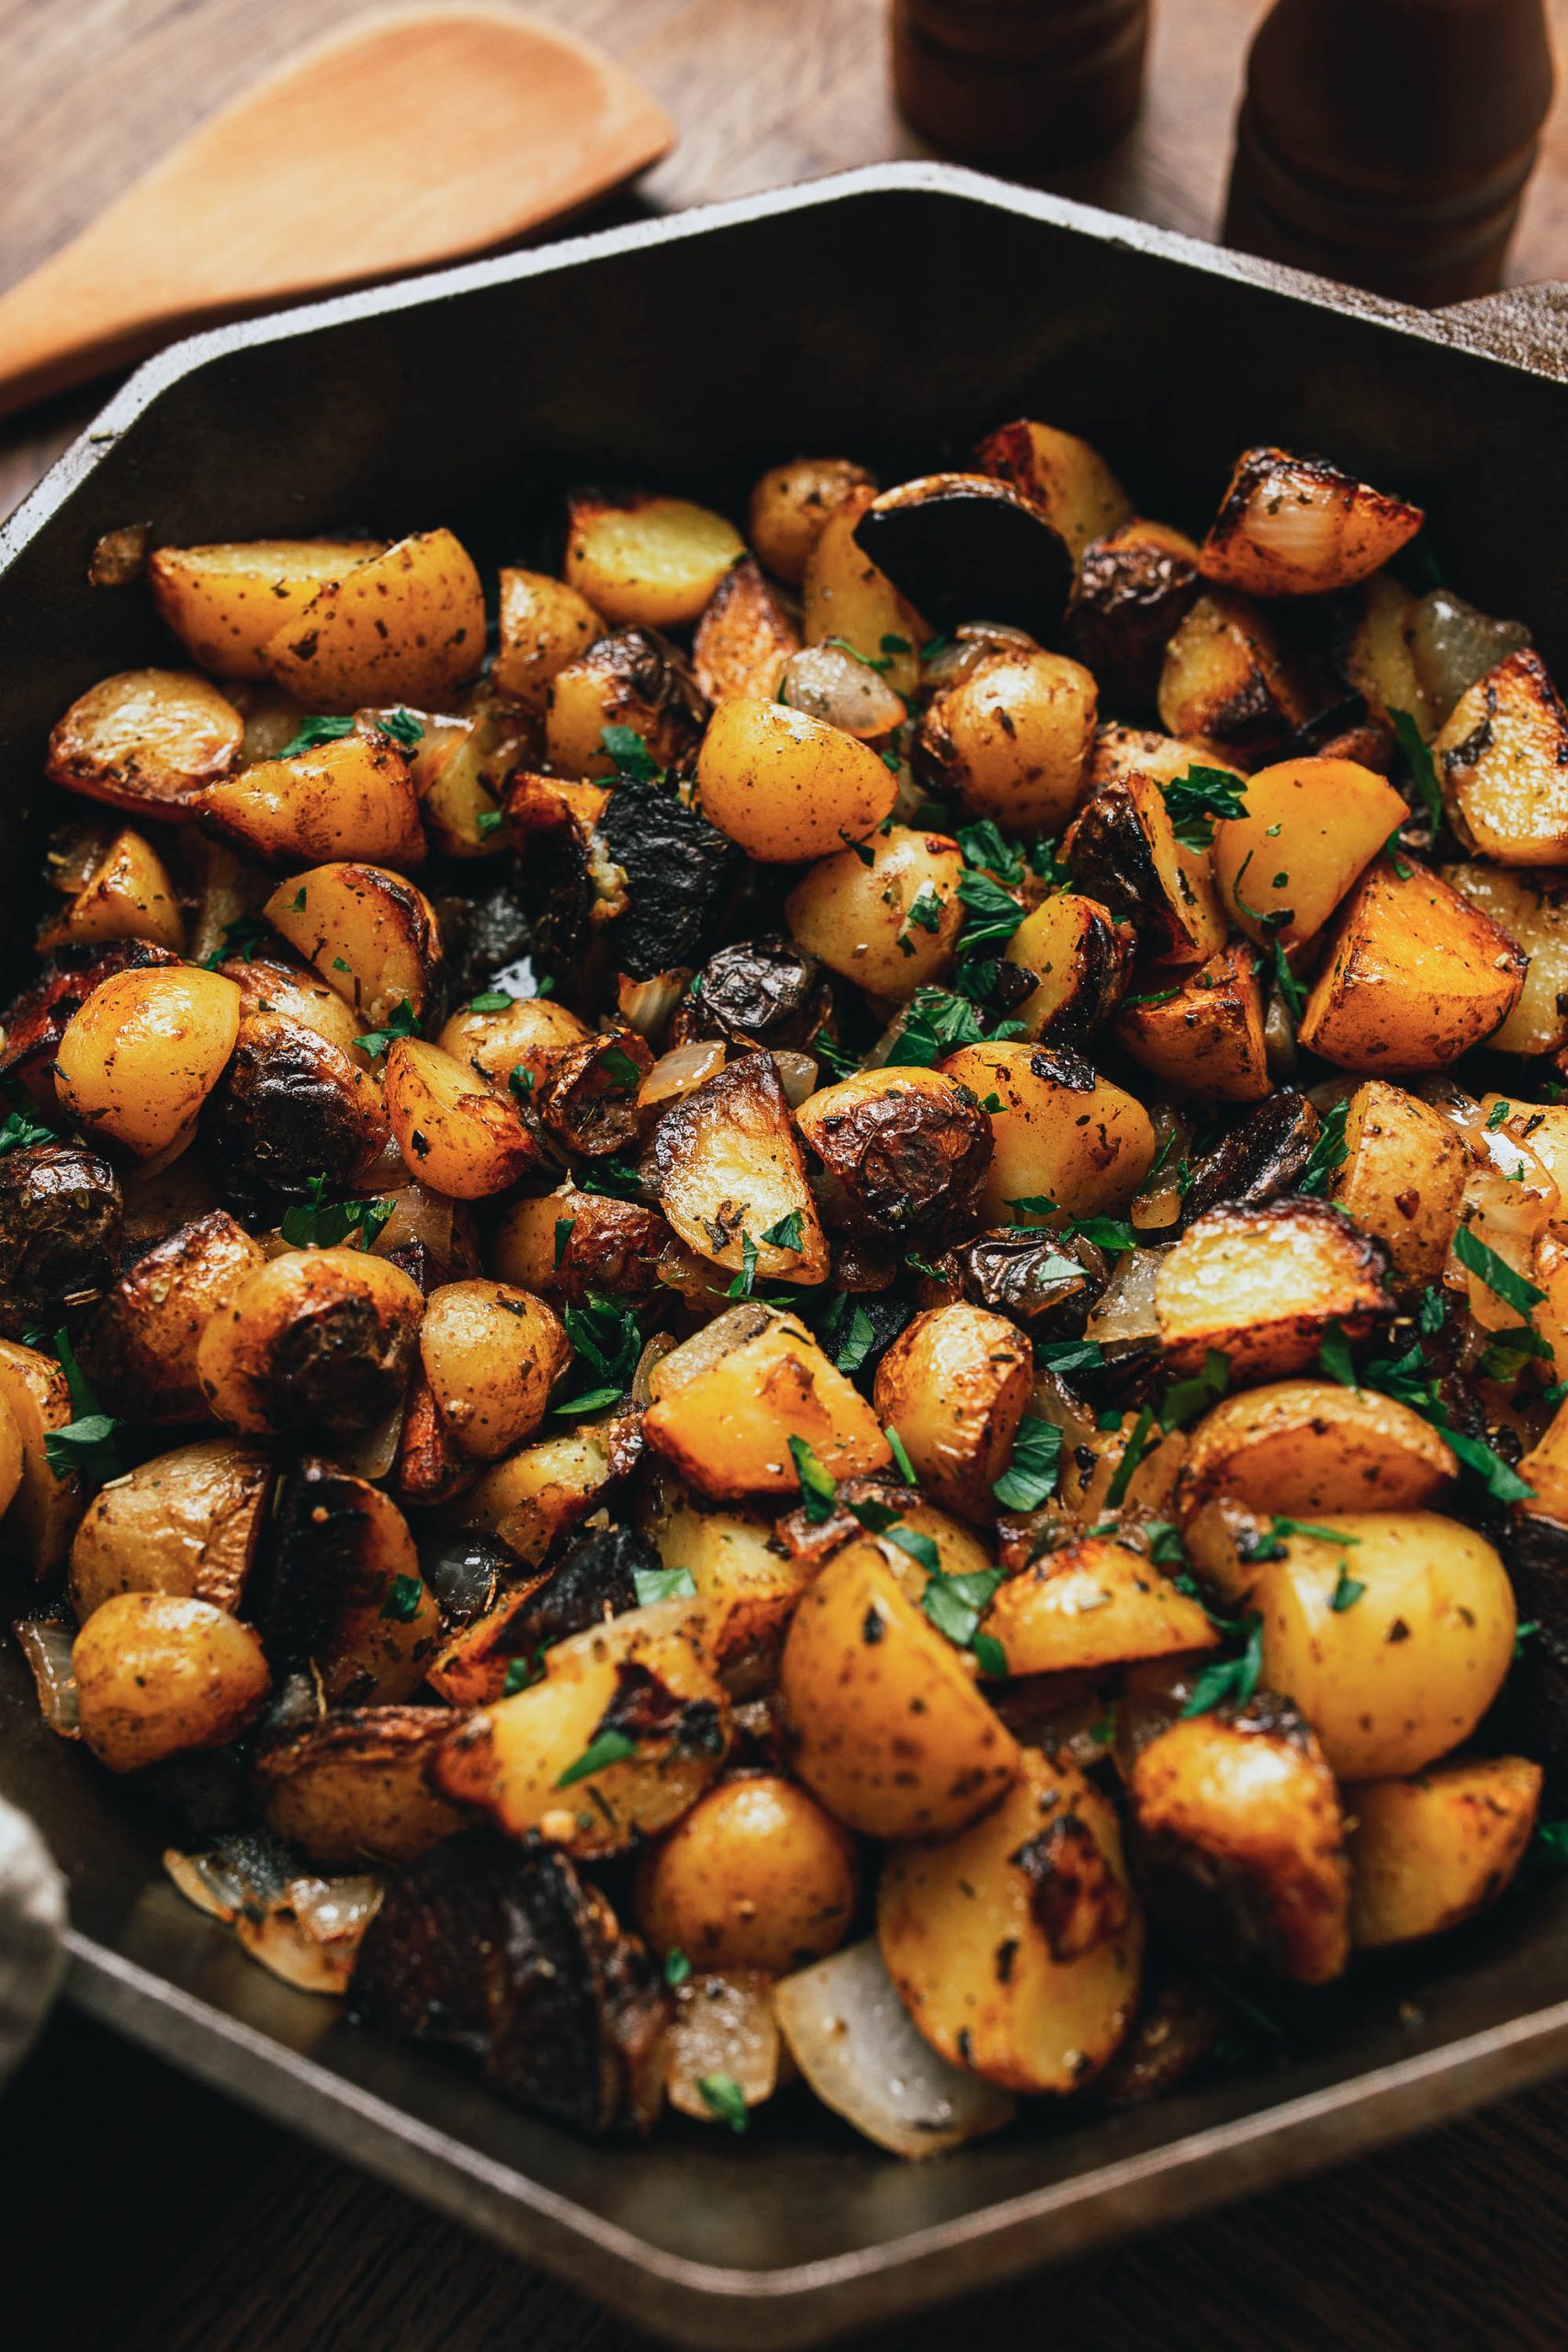 A skillet filled with roasted baby potatoes, chunks of garlic, and herbs, placed on a wooden table with salt and pepper mills in the background.